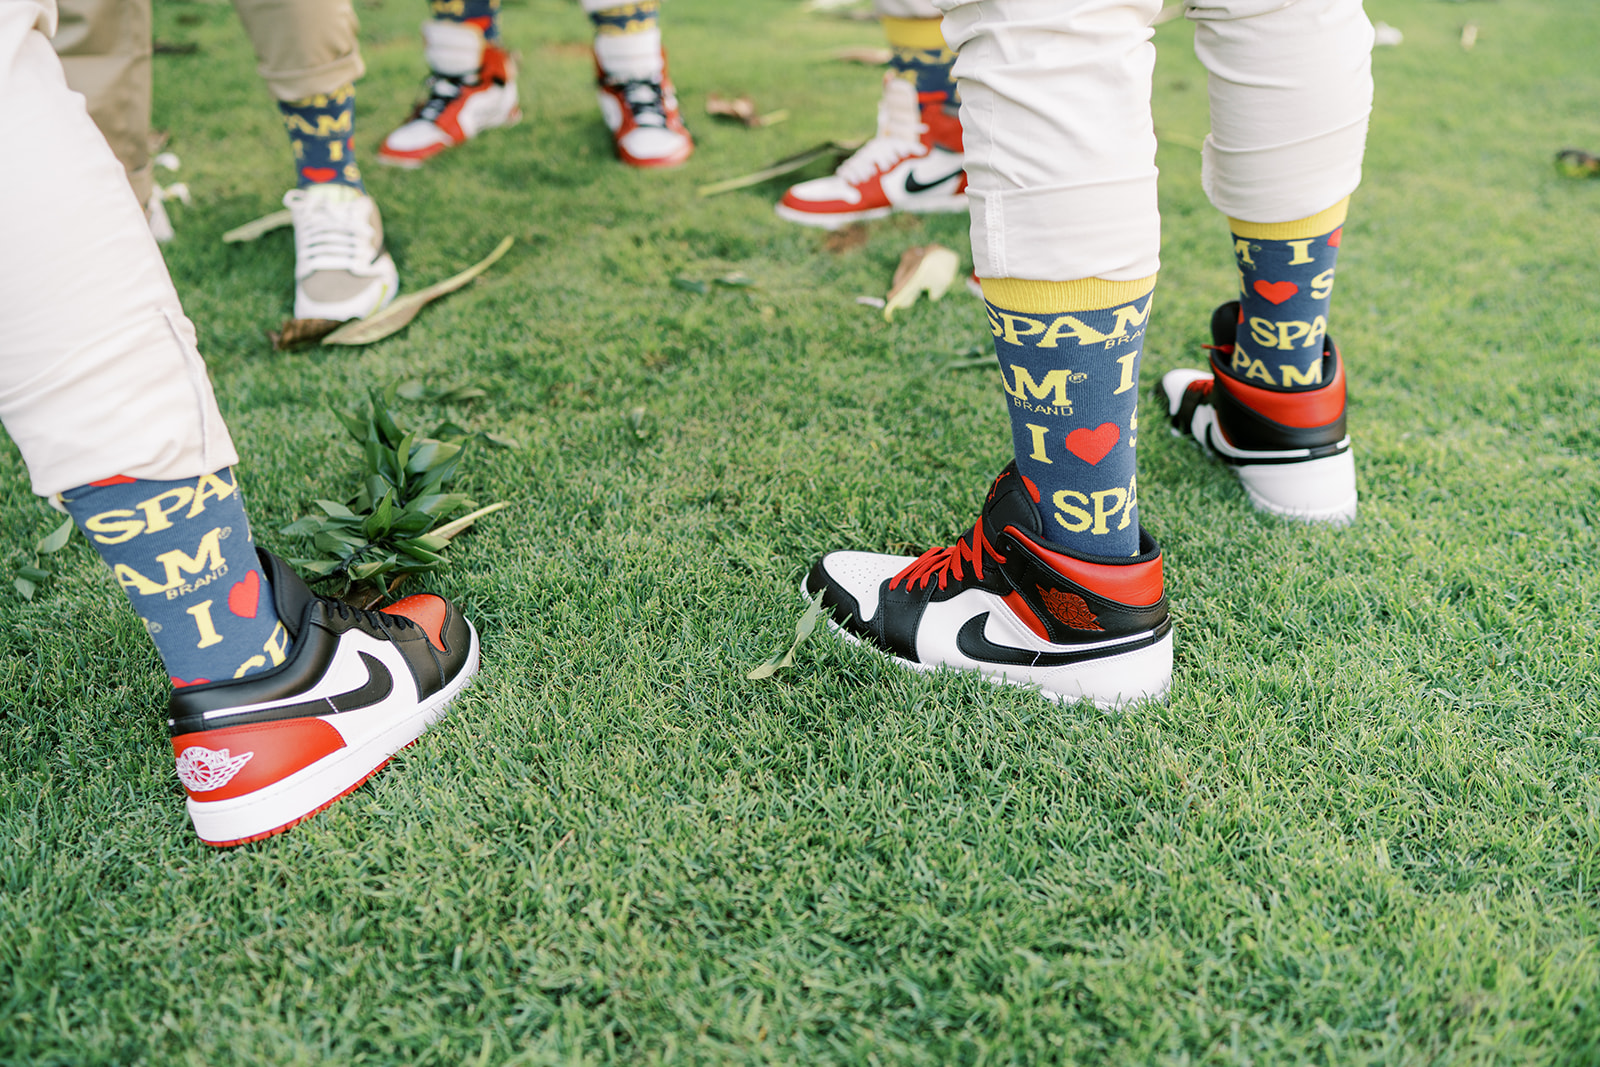 A group of people wearing sneakers and colorful socks with the word "spam" on them, standing on grass.